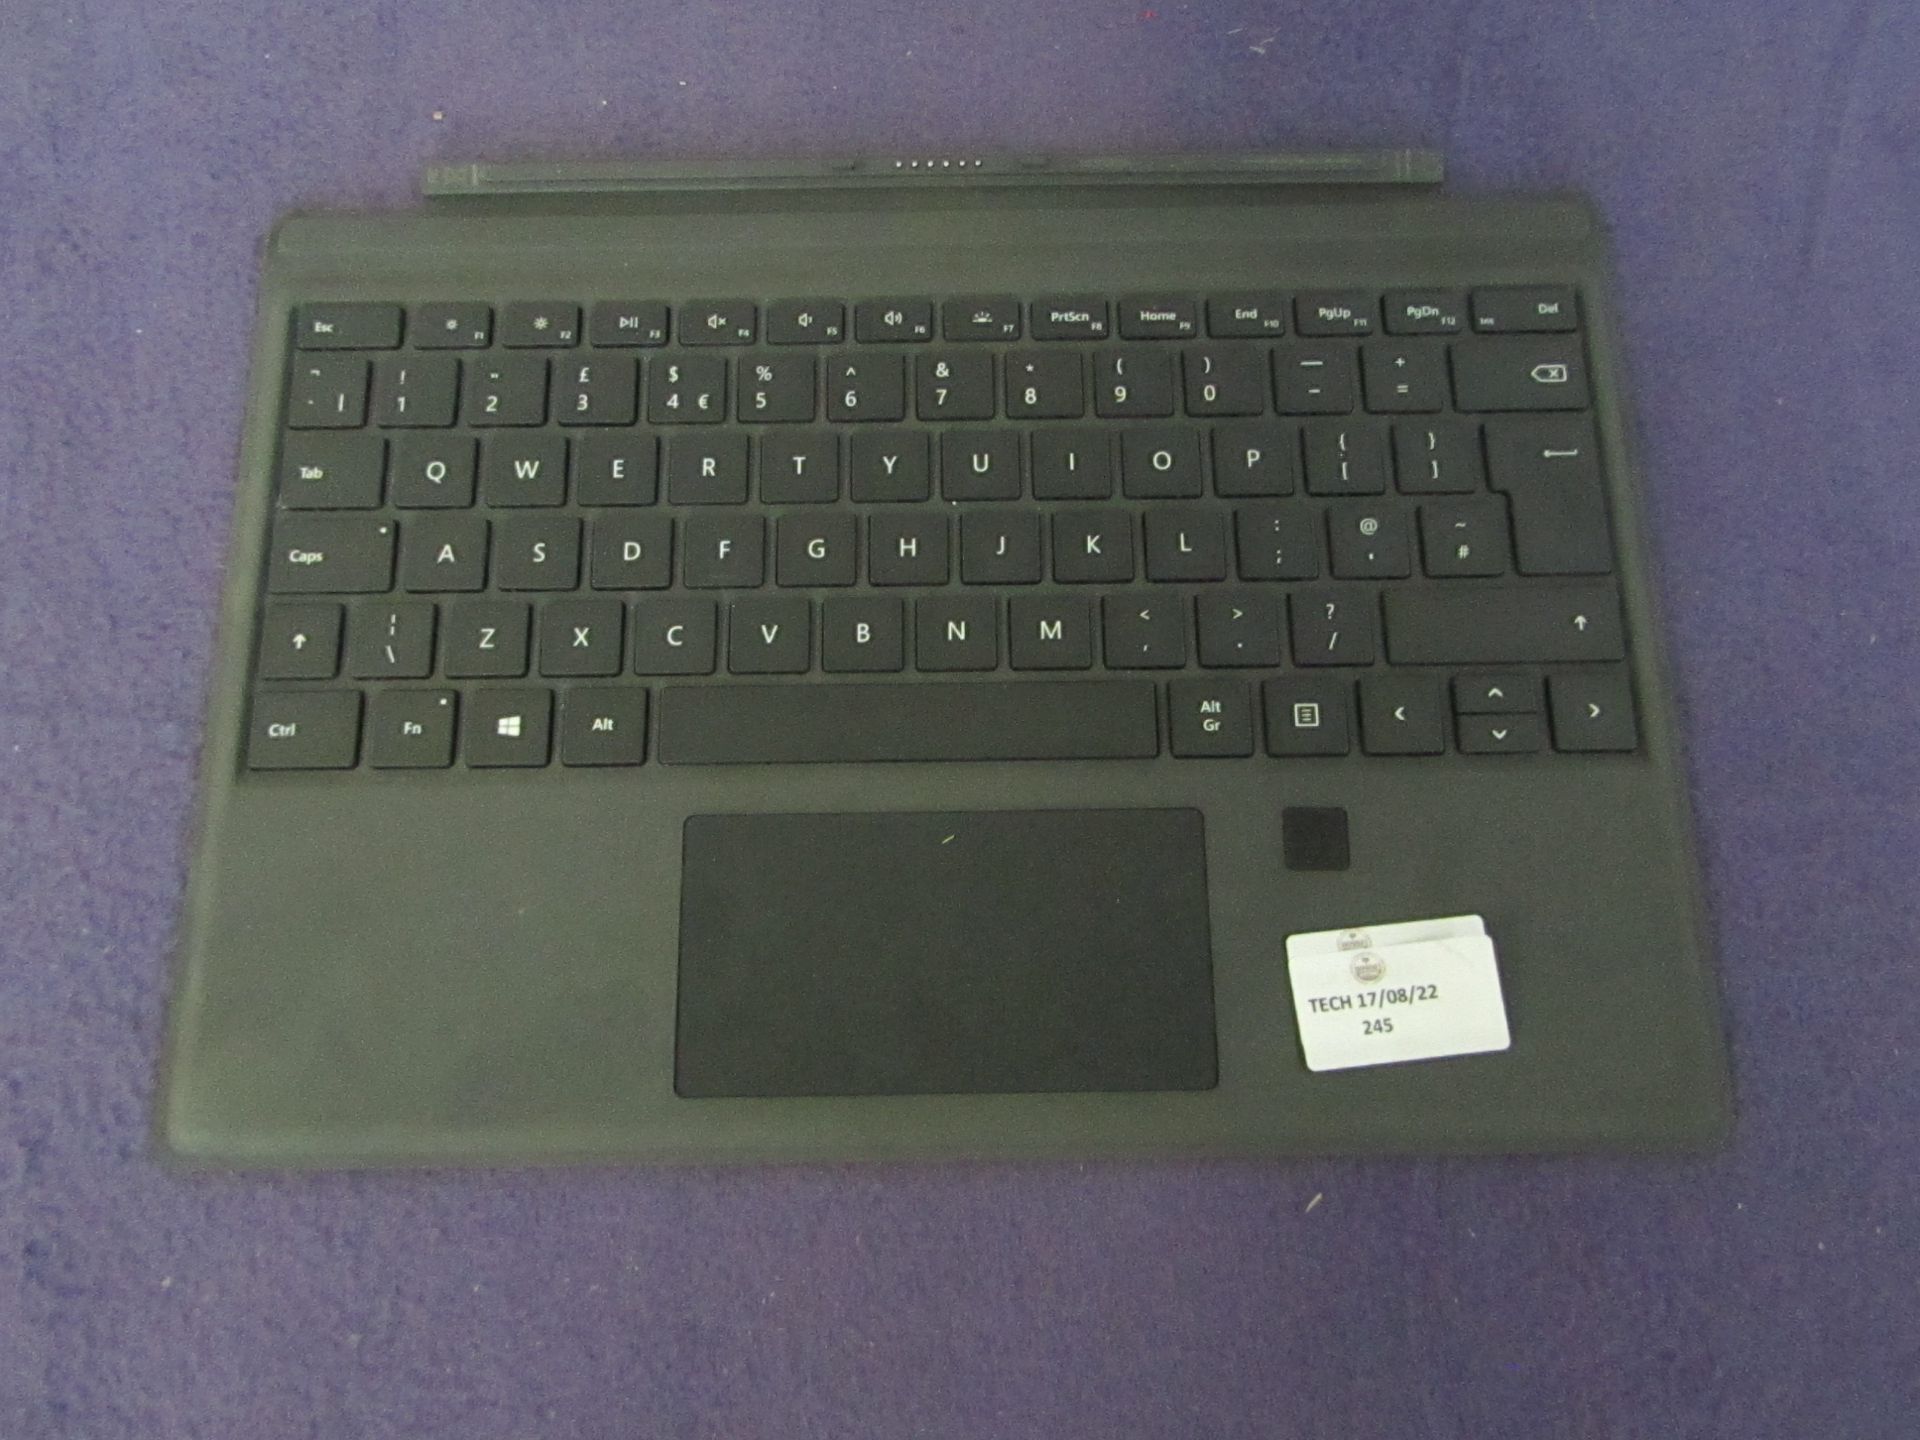 Microsoft - Surface Go2 or Go3 - Type Cover - Grey keyboard - Untested, Non Original Packaging.